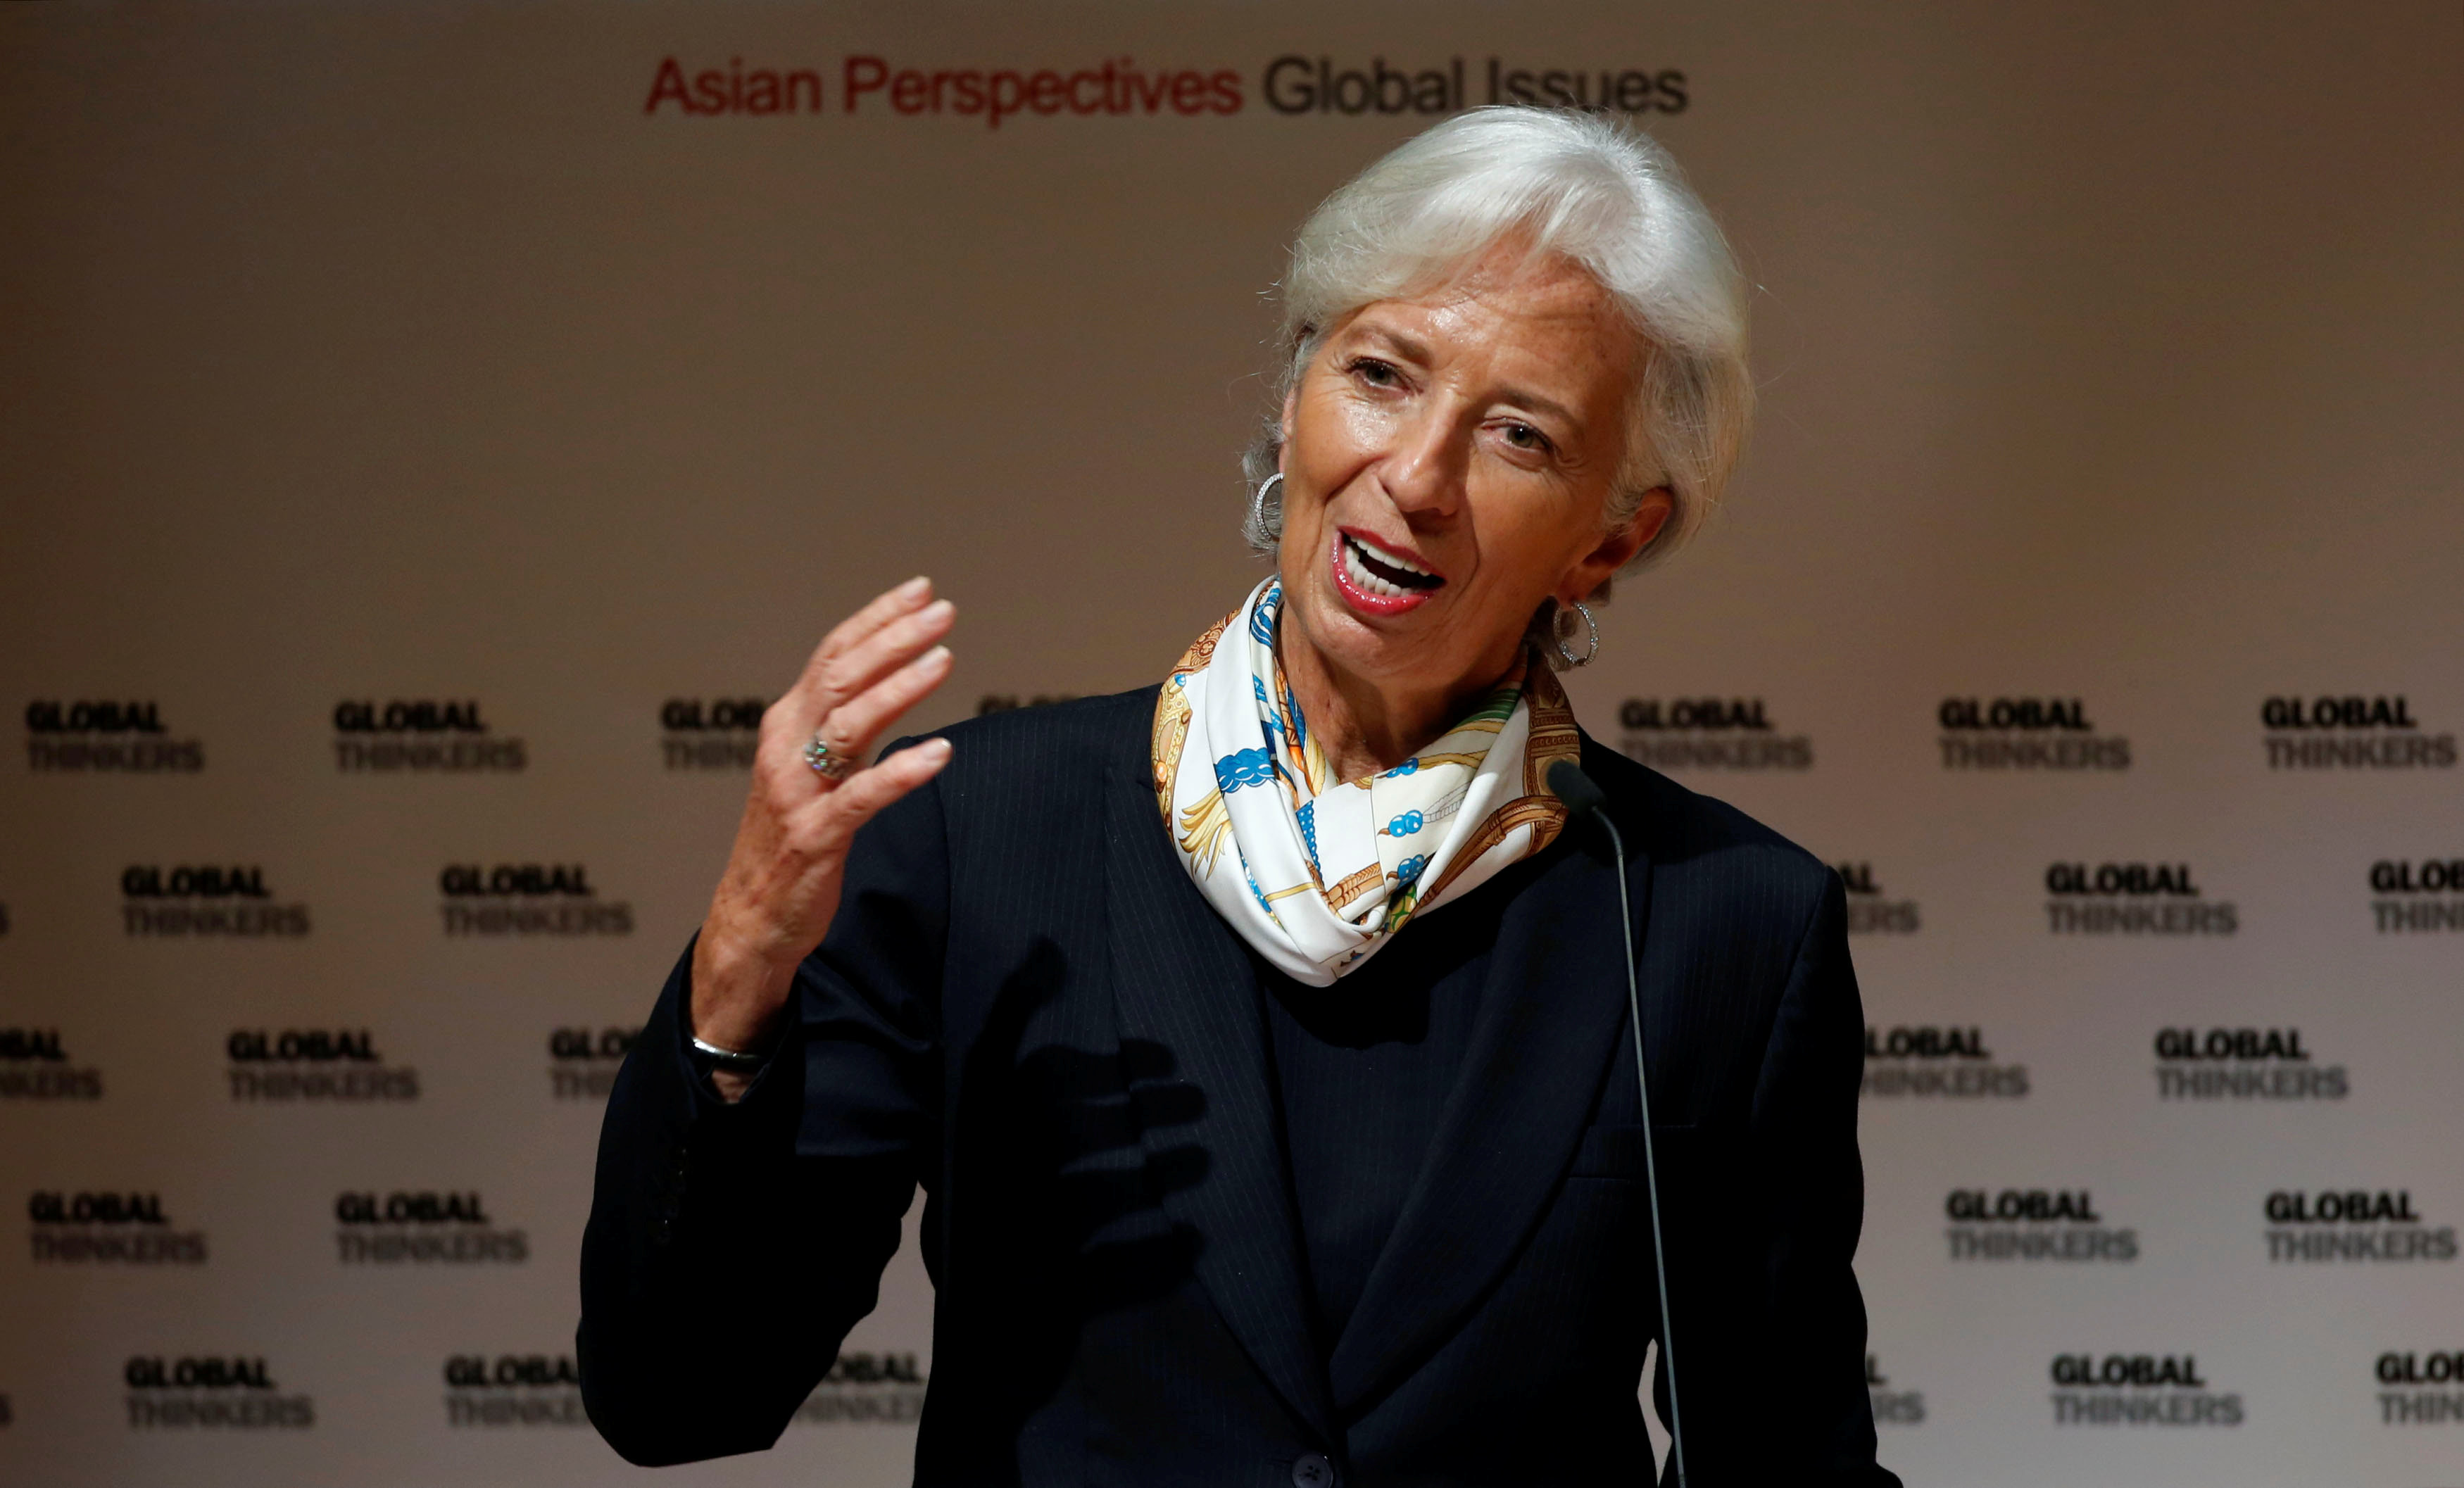 IMF chief optimistic on growth, warns against trade protectionism